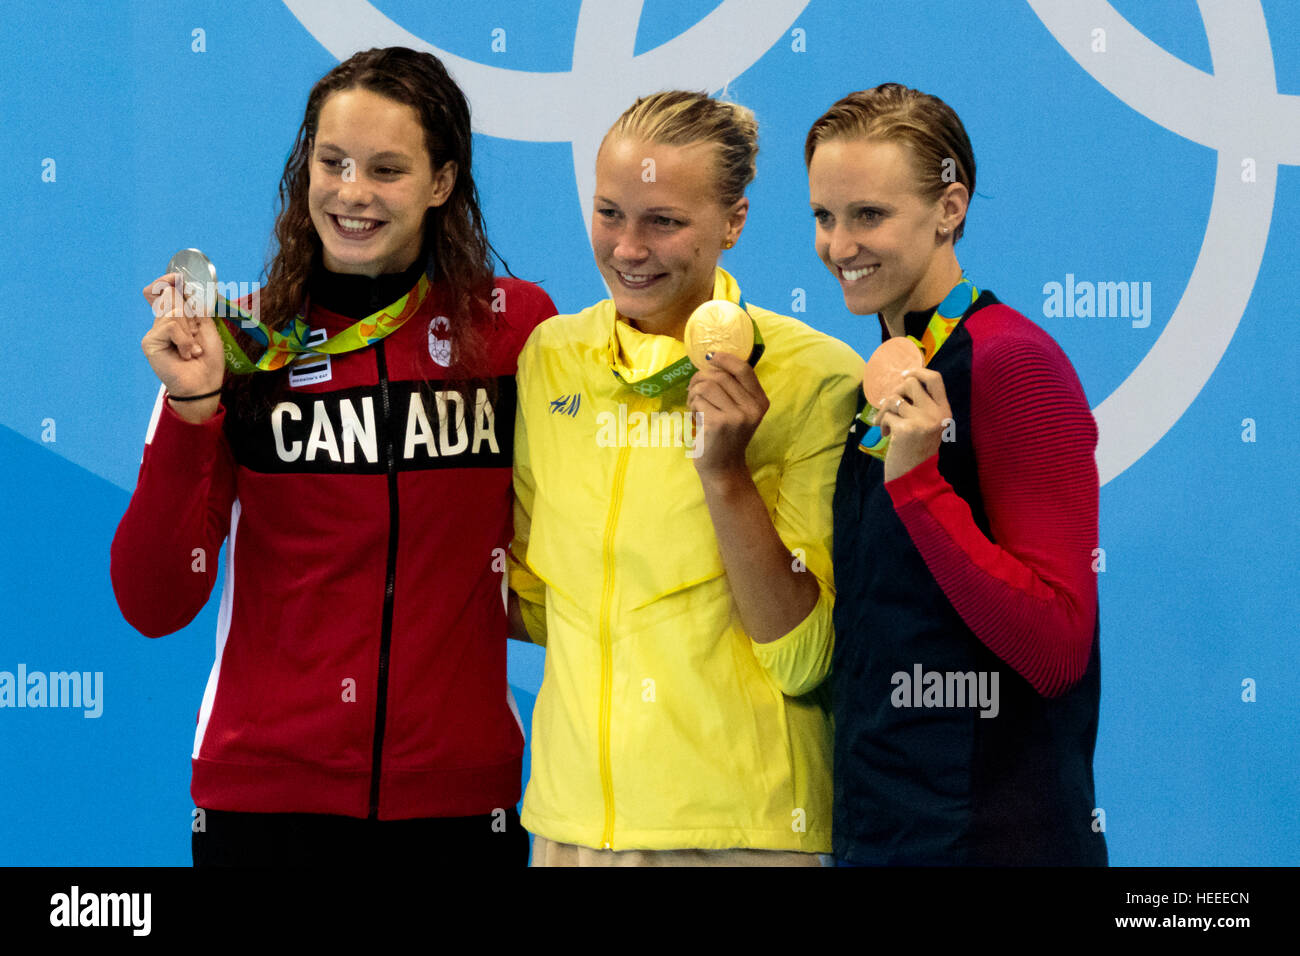 Rio de Janeiro, Brazil. 7 August 2016.   Sarah Sjostrom (SWE)-C- the gold medal winner of the Women's 100m Butterfly with Penny Oleksiak (CAN)-silver Stock Photo